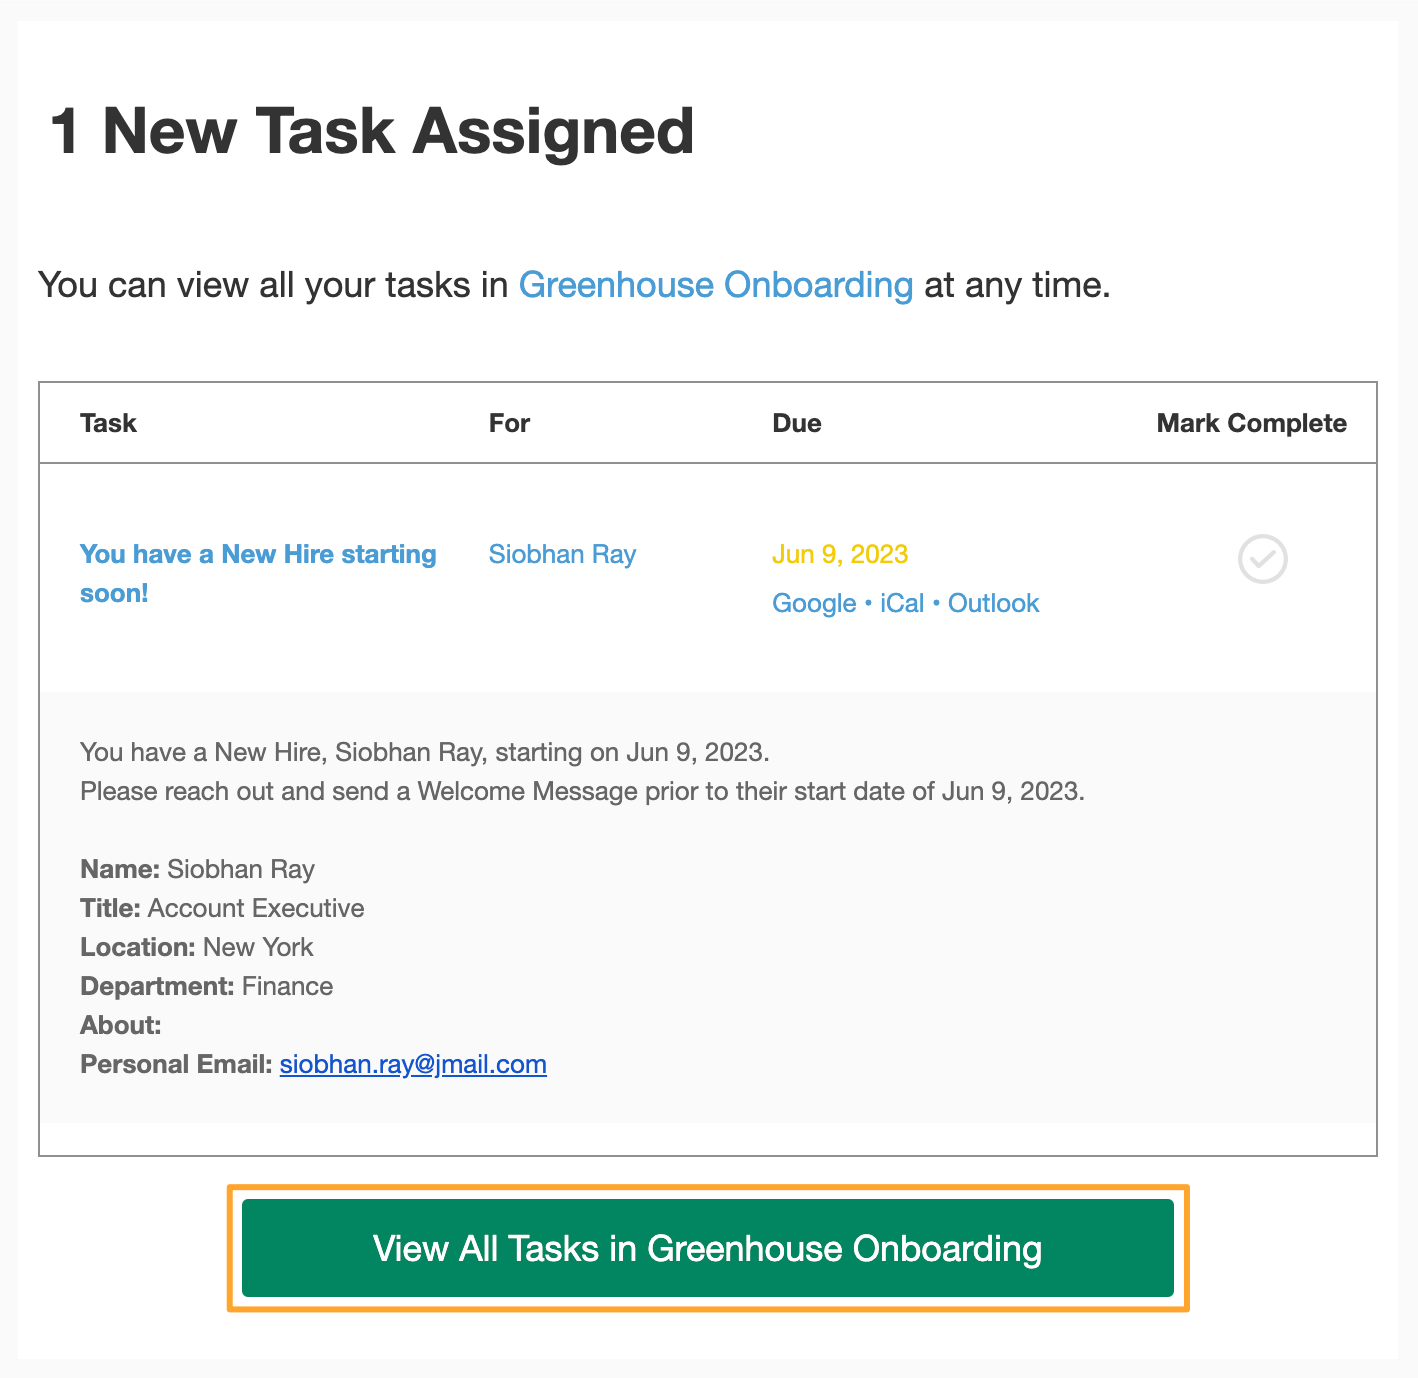 1 New Task Assigned email with View All Tasks in Greenhouse Onboarding button highlighted